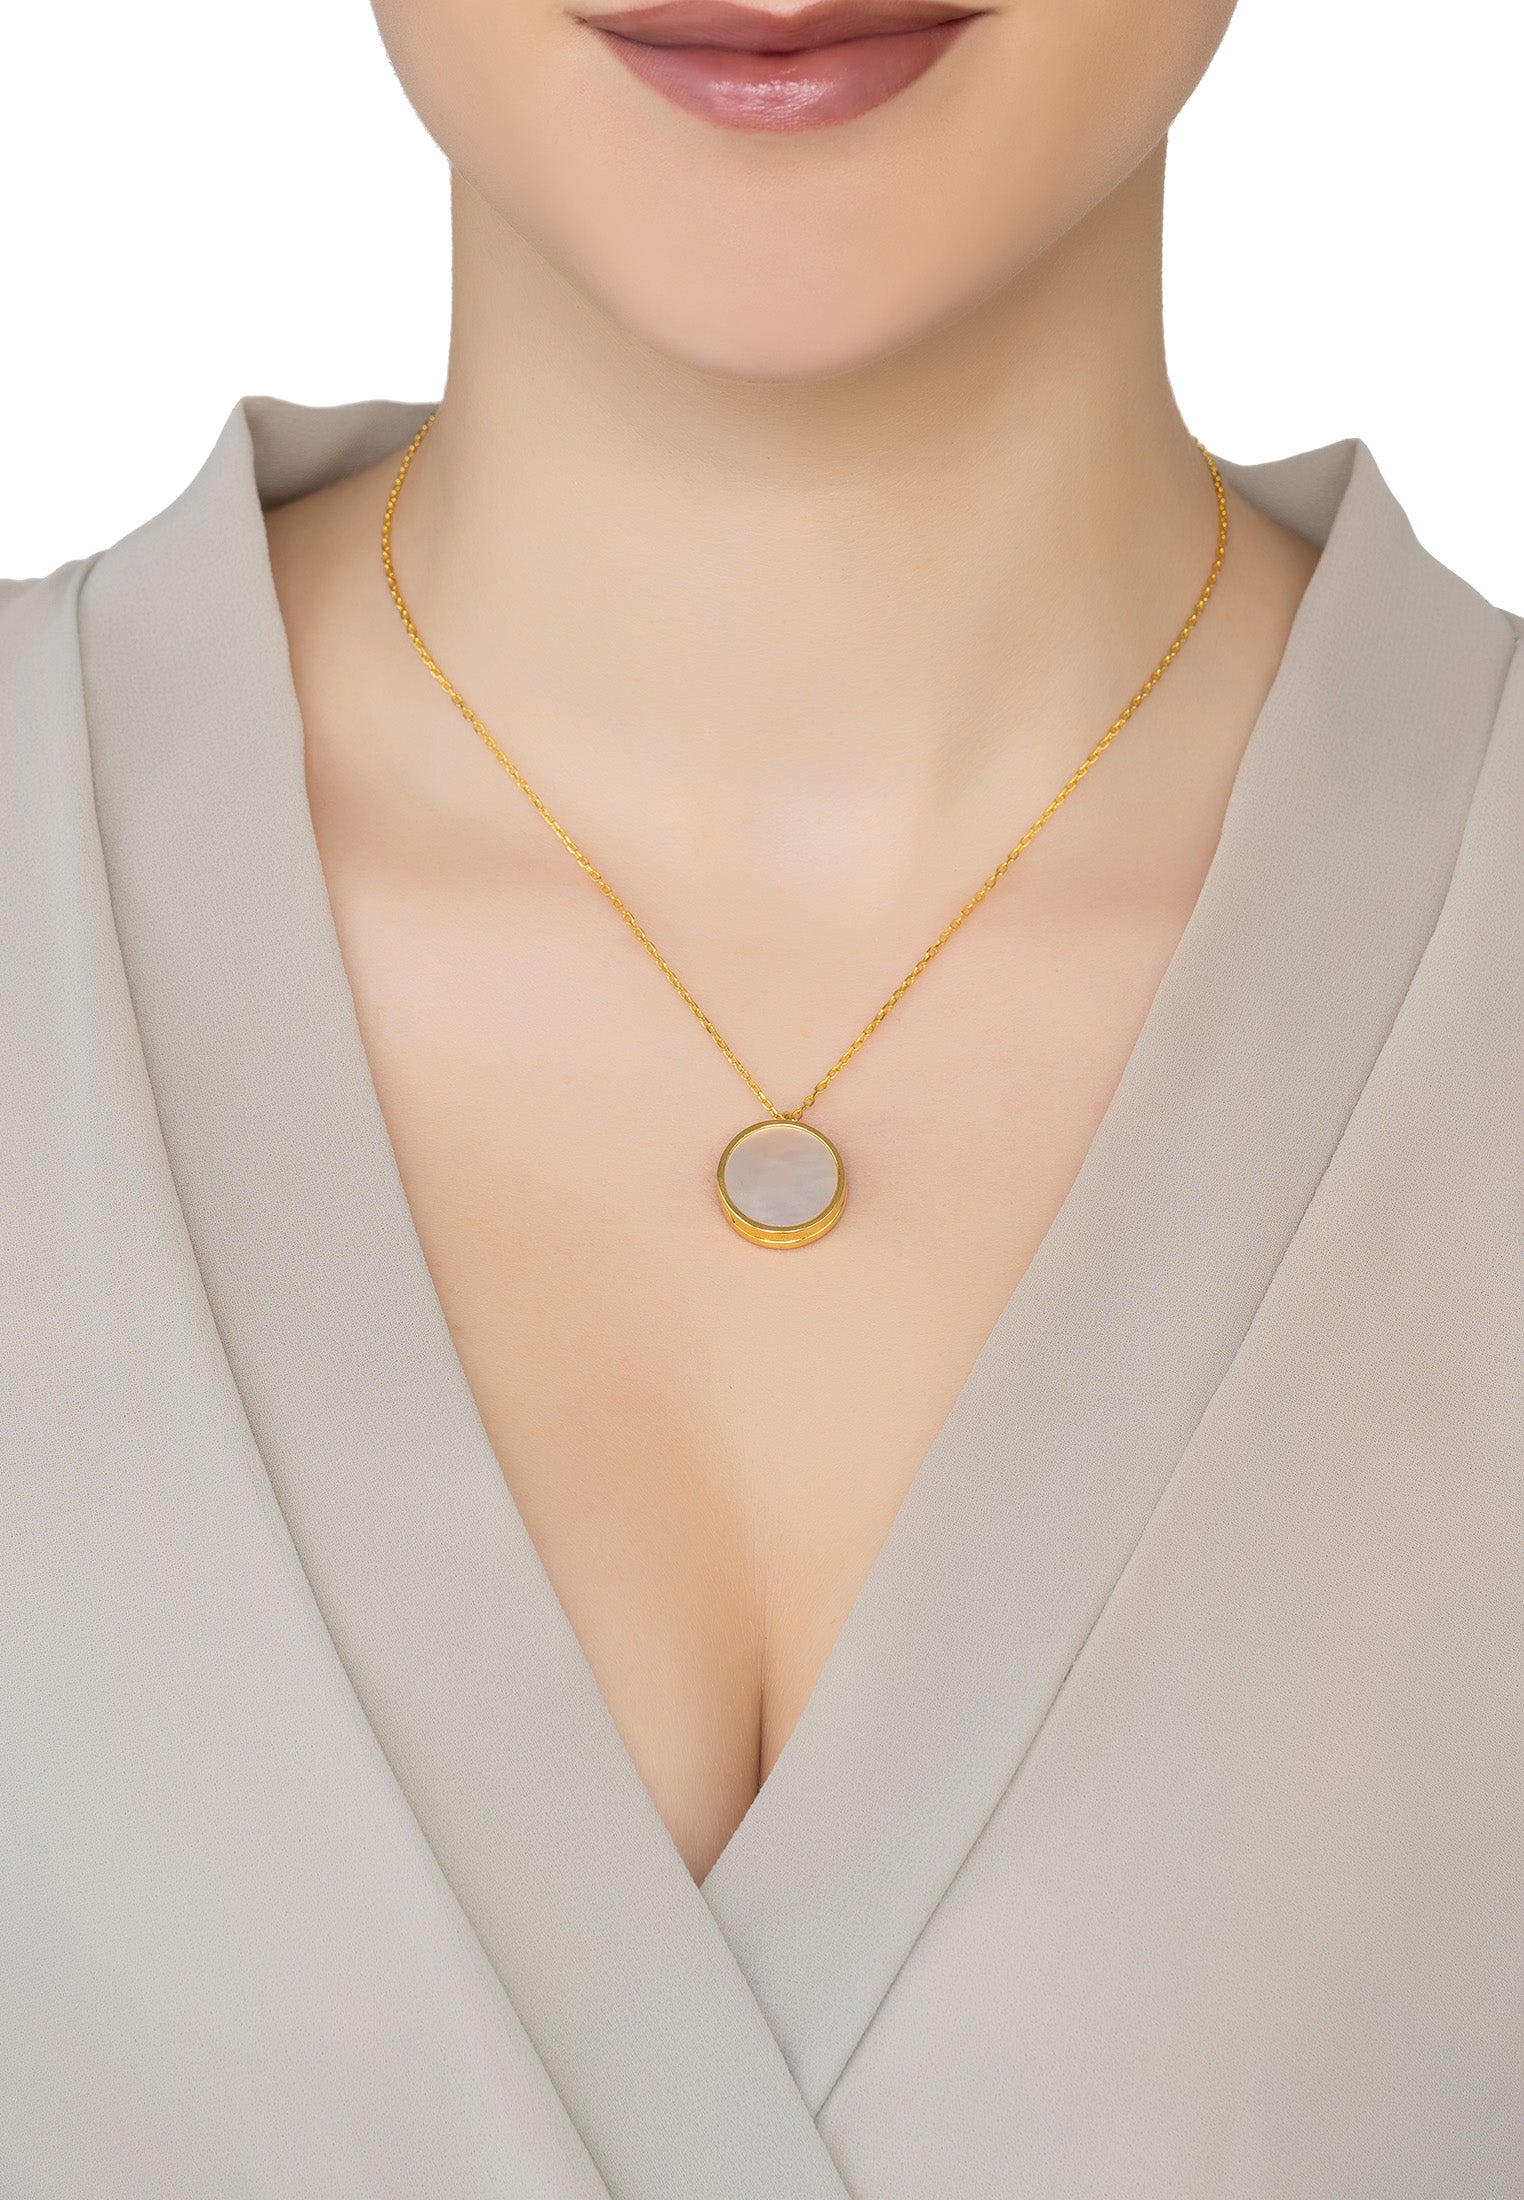 Round Mother Of Pearl Locket Pendant Necklace Gold